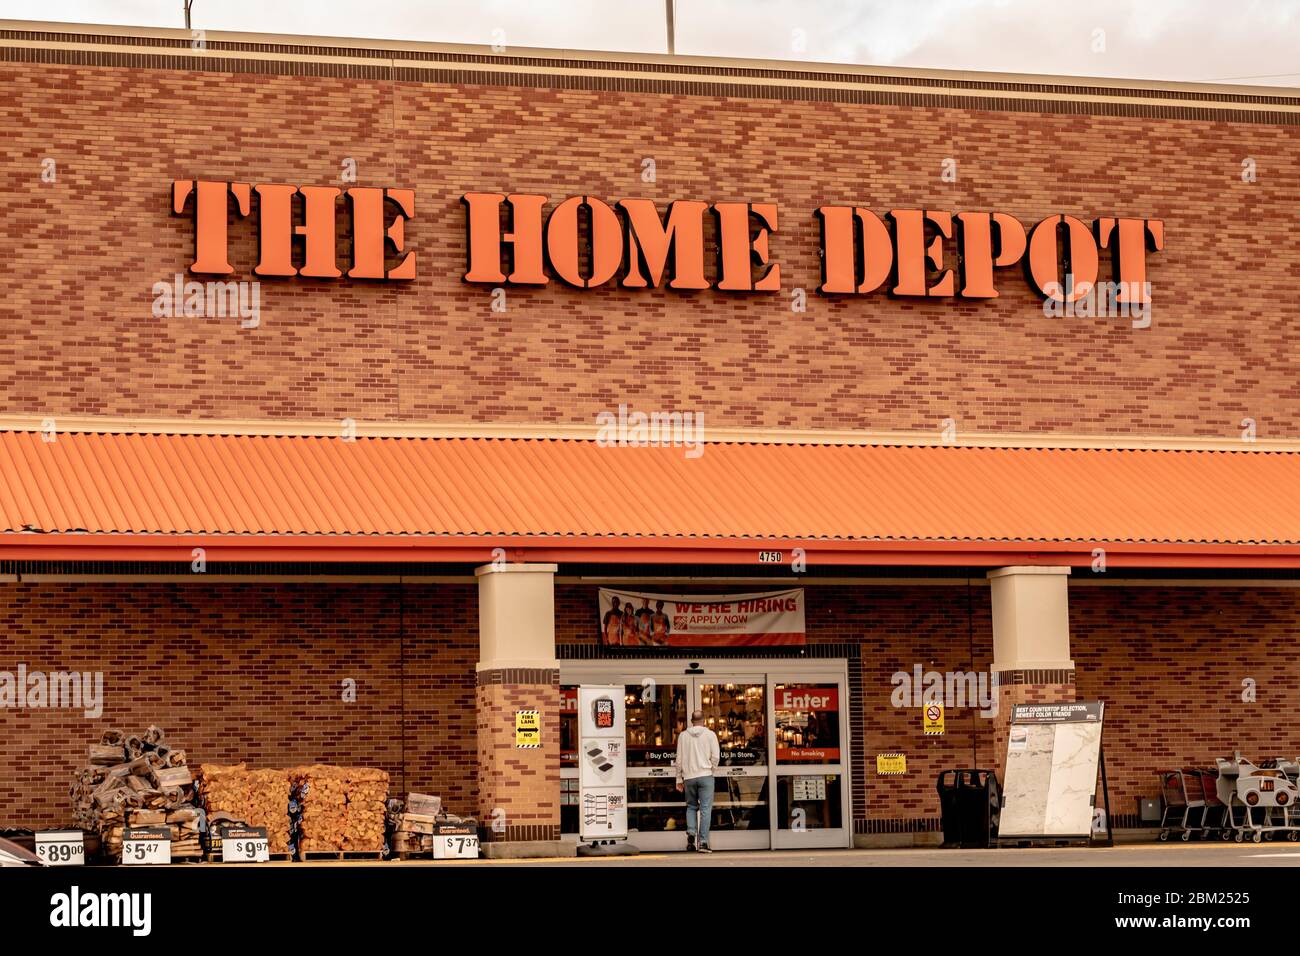 Charlotte, NC/USA - January 15, 2020: Horizontal medium closeup of facade of 'The Home Depot' showing brand in orange letters above entrance. Stock Photo